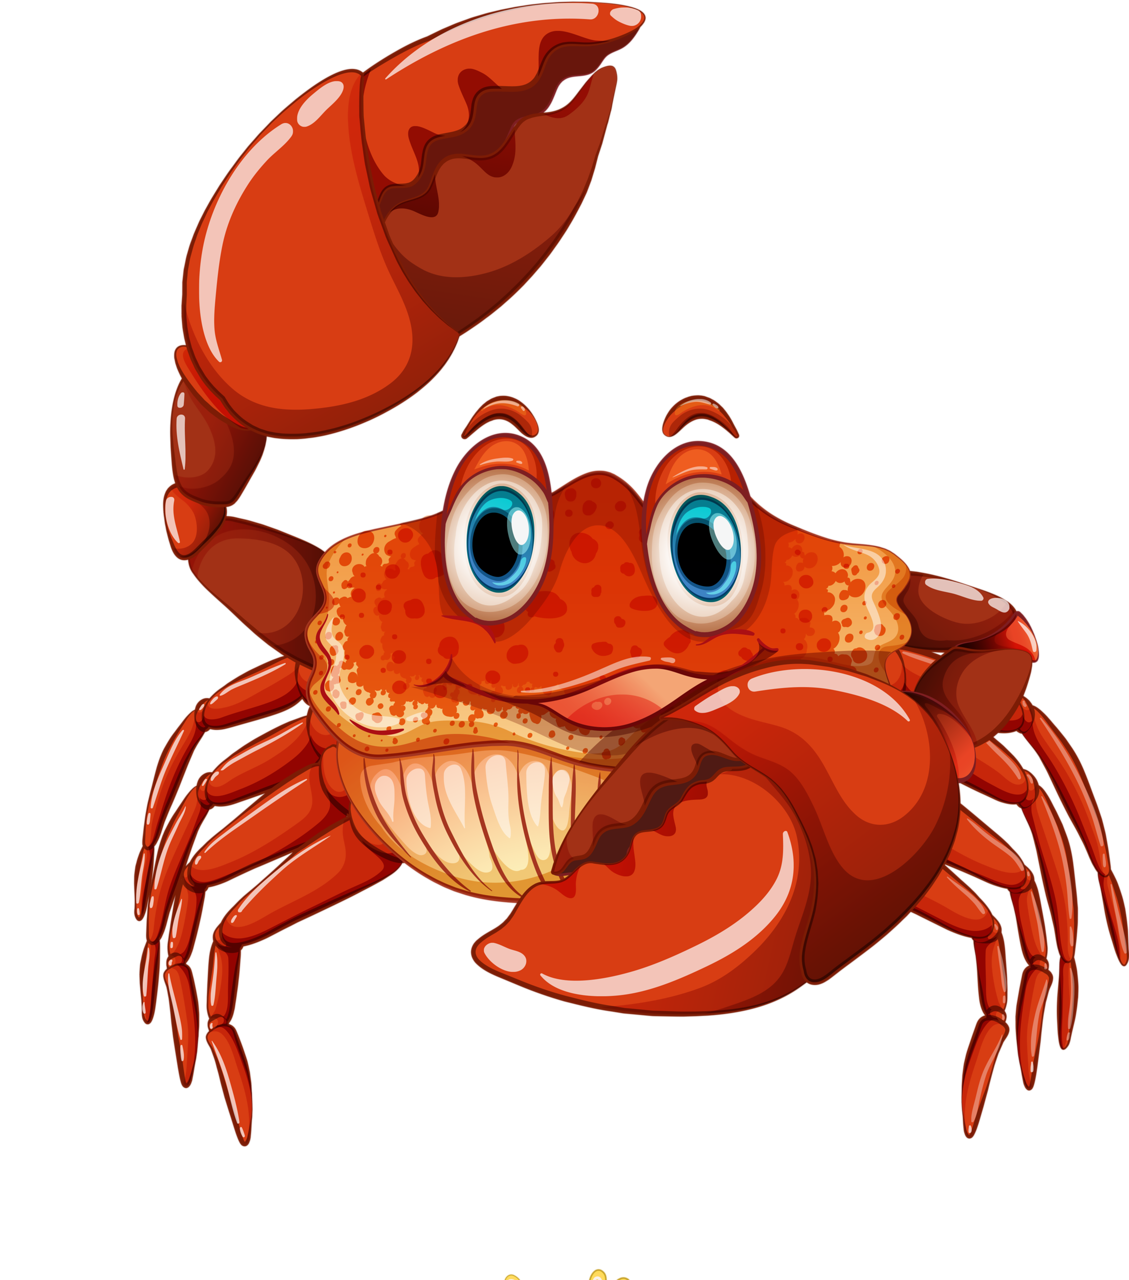  png pinterest clip. Crab clipart two animal